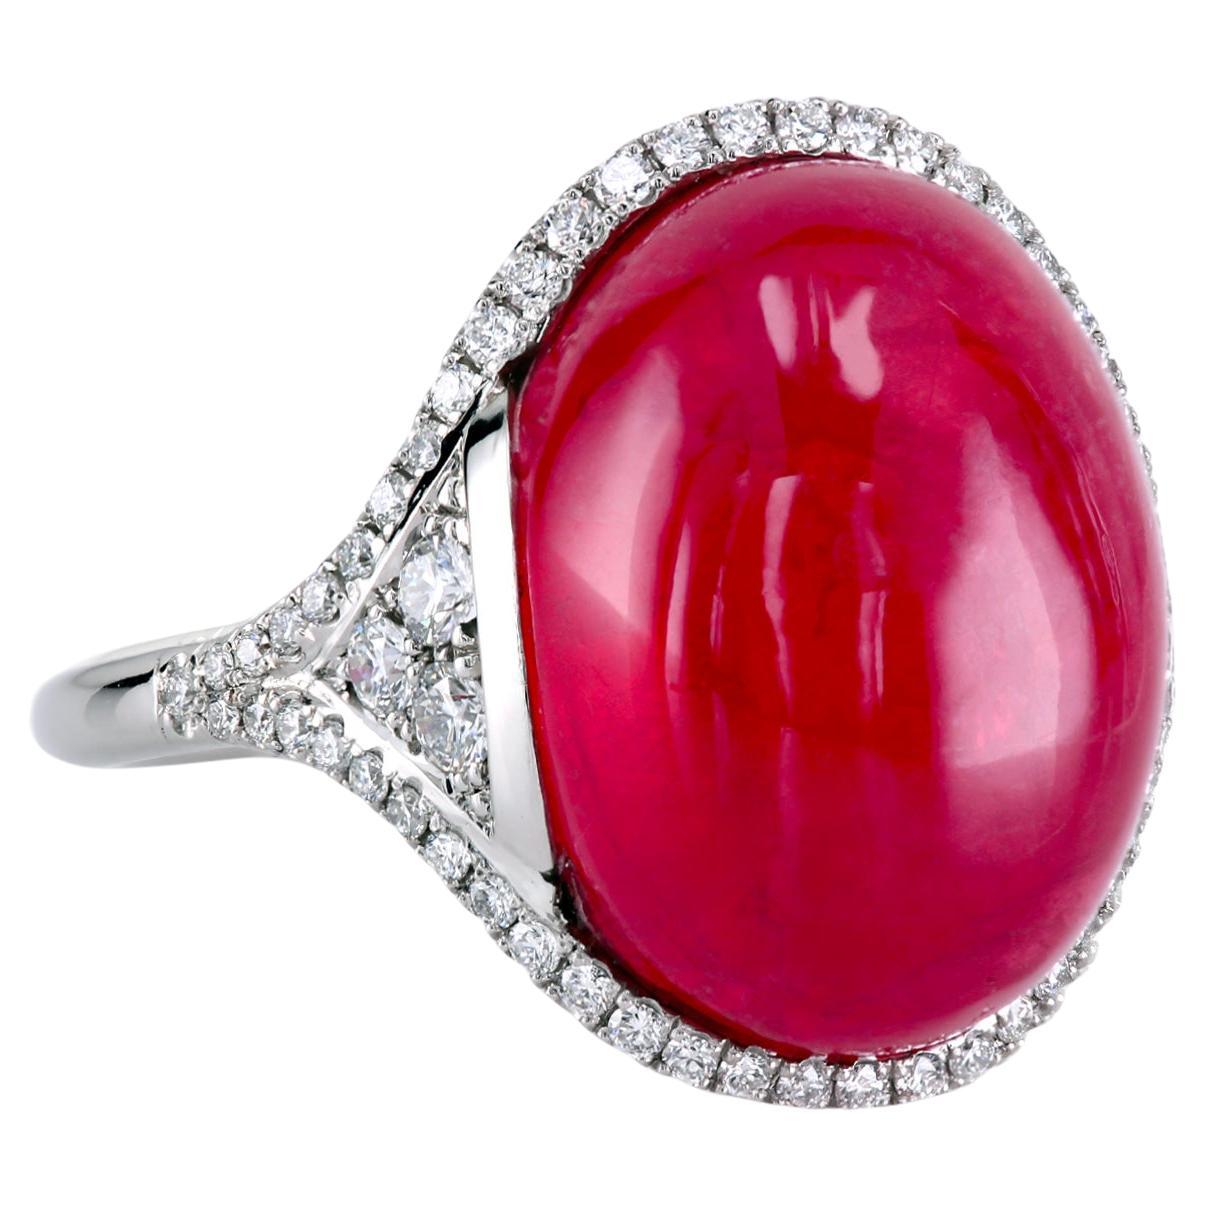 Leon Mege Platinum Art Deco Style Ring with Cabochon Rhodonite and Diamond Pave 